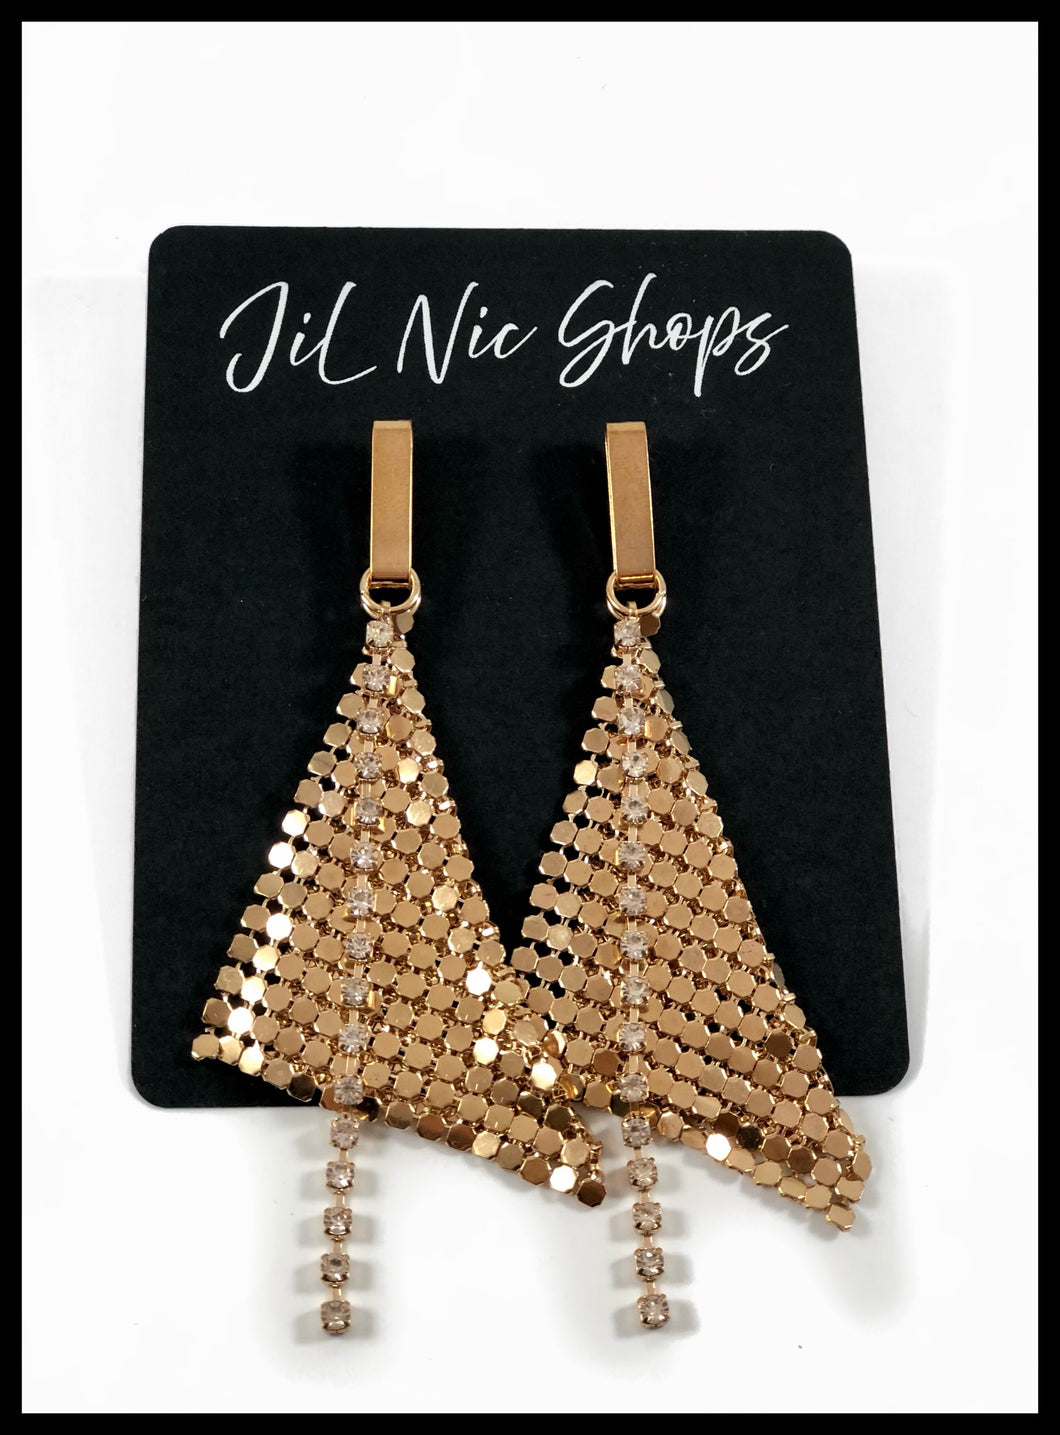 Metal Mesh Dangle with Rhinestones Earrings Color: Gold/Clear Approx. 3.5